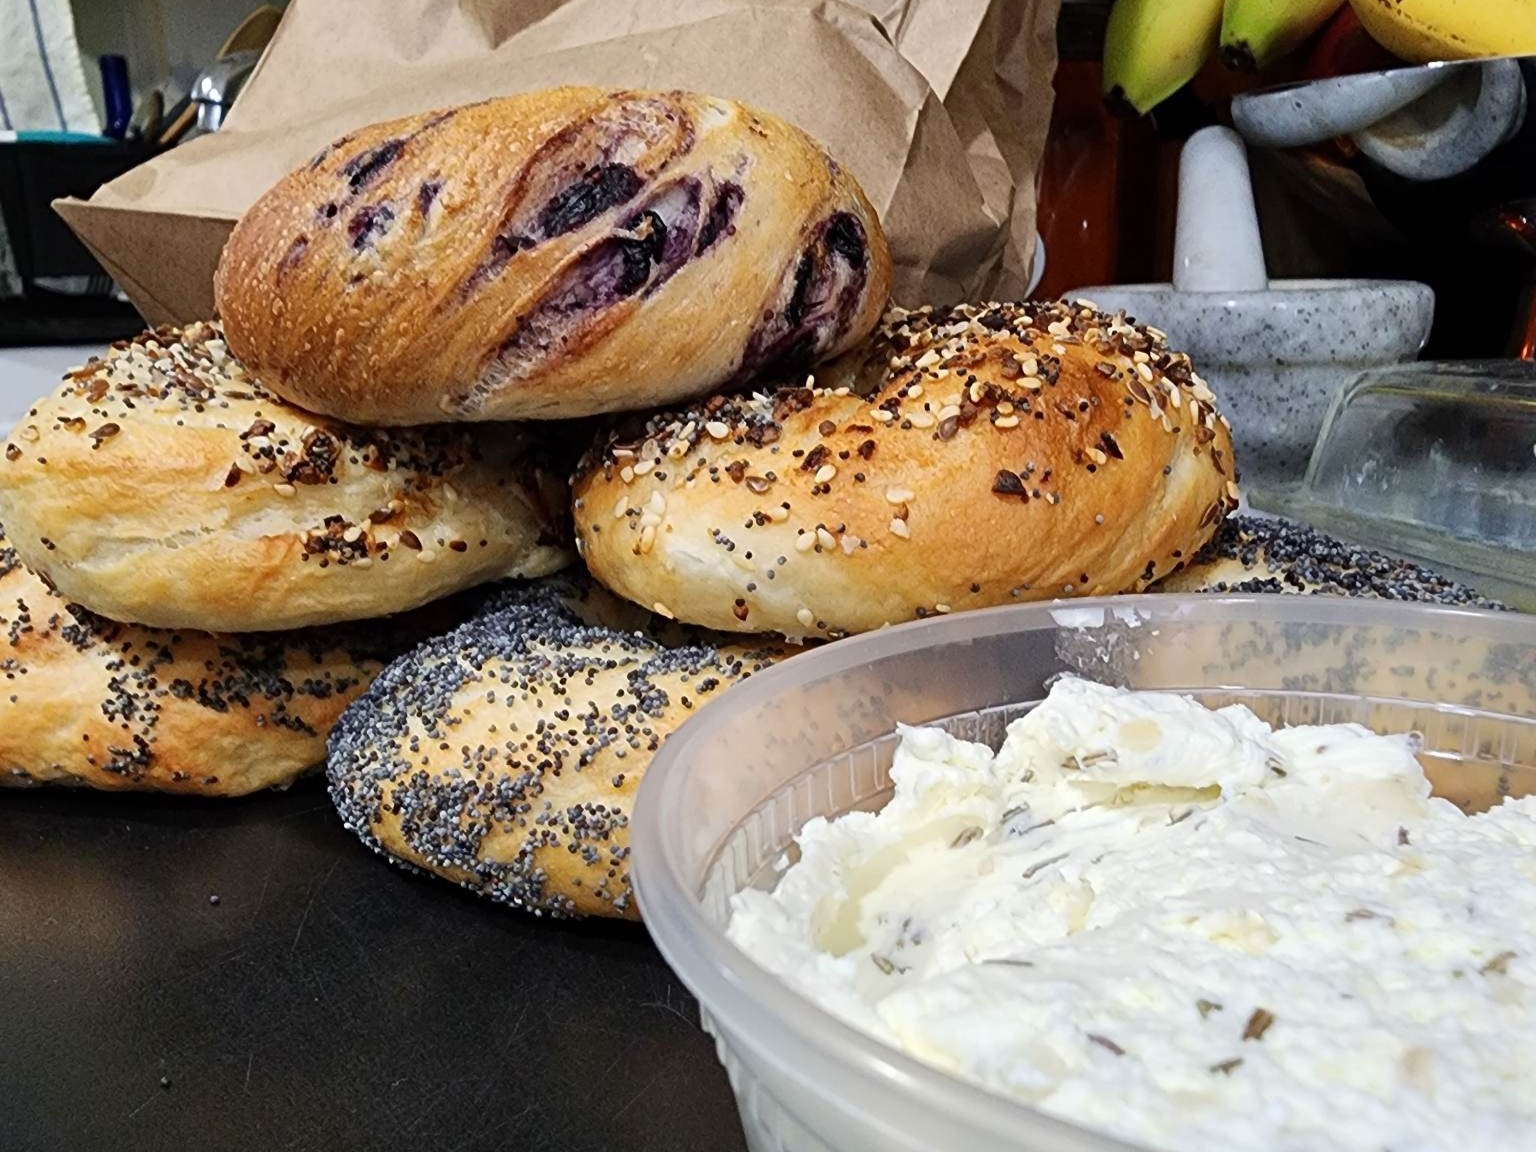 Discover the best bagels in Saint John NB at the Bagel Artist on Rothesay Ave